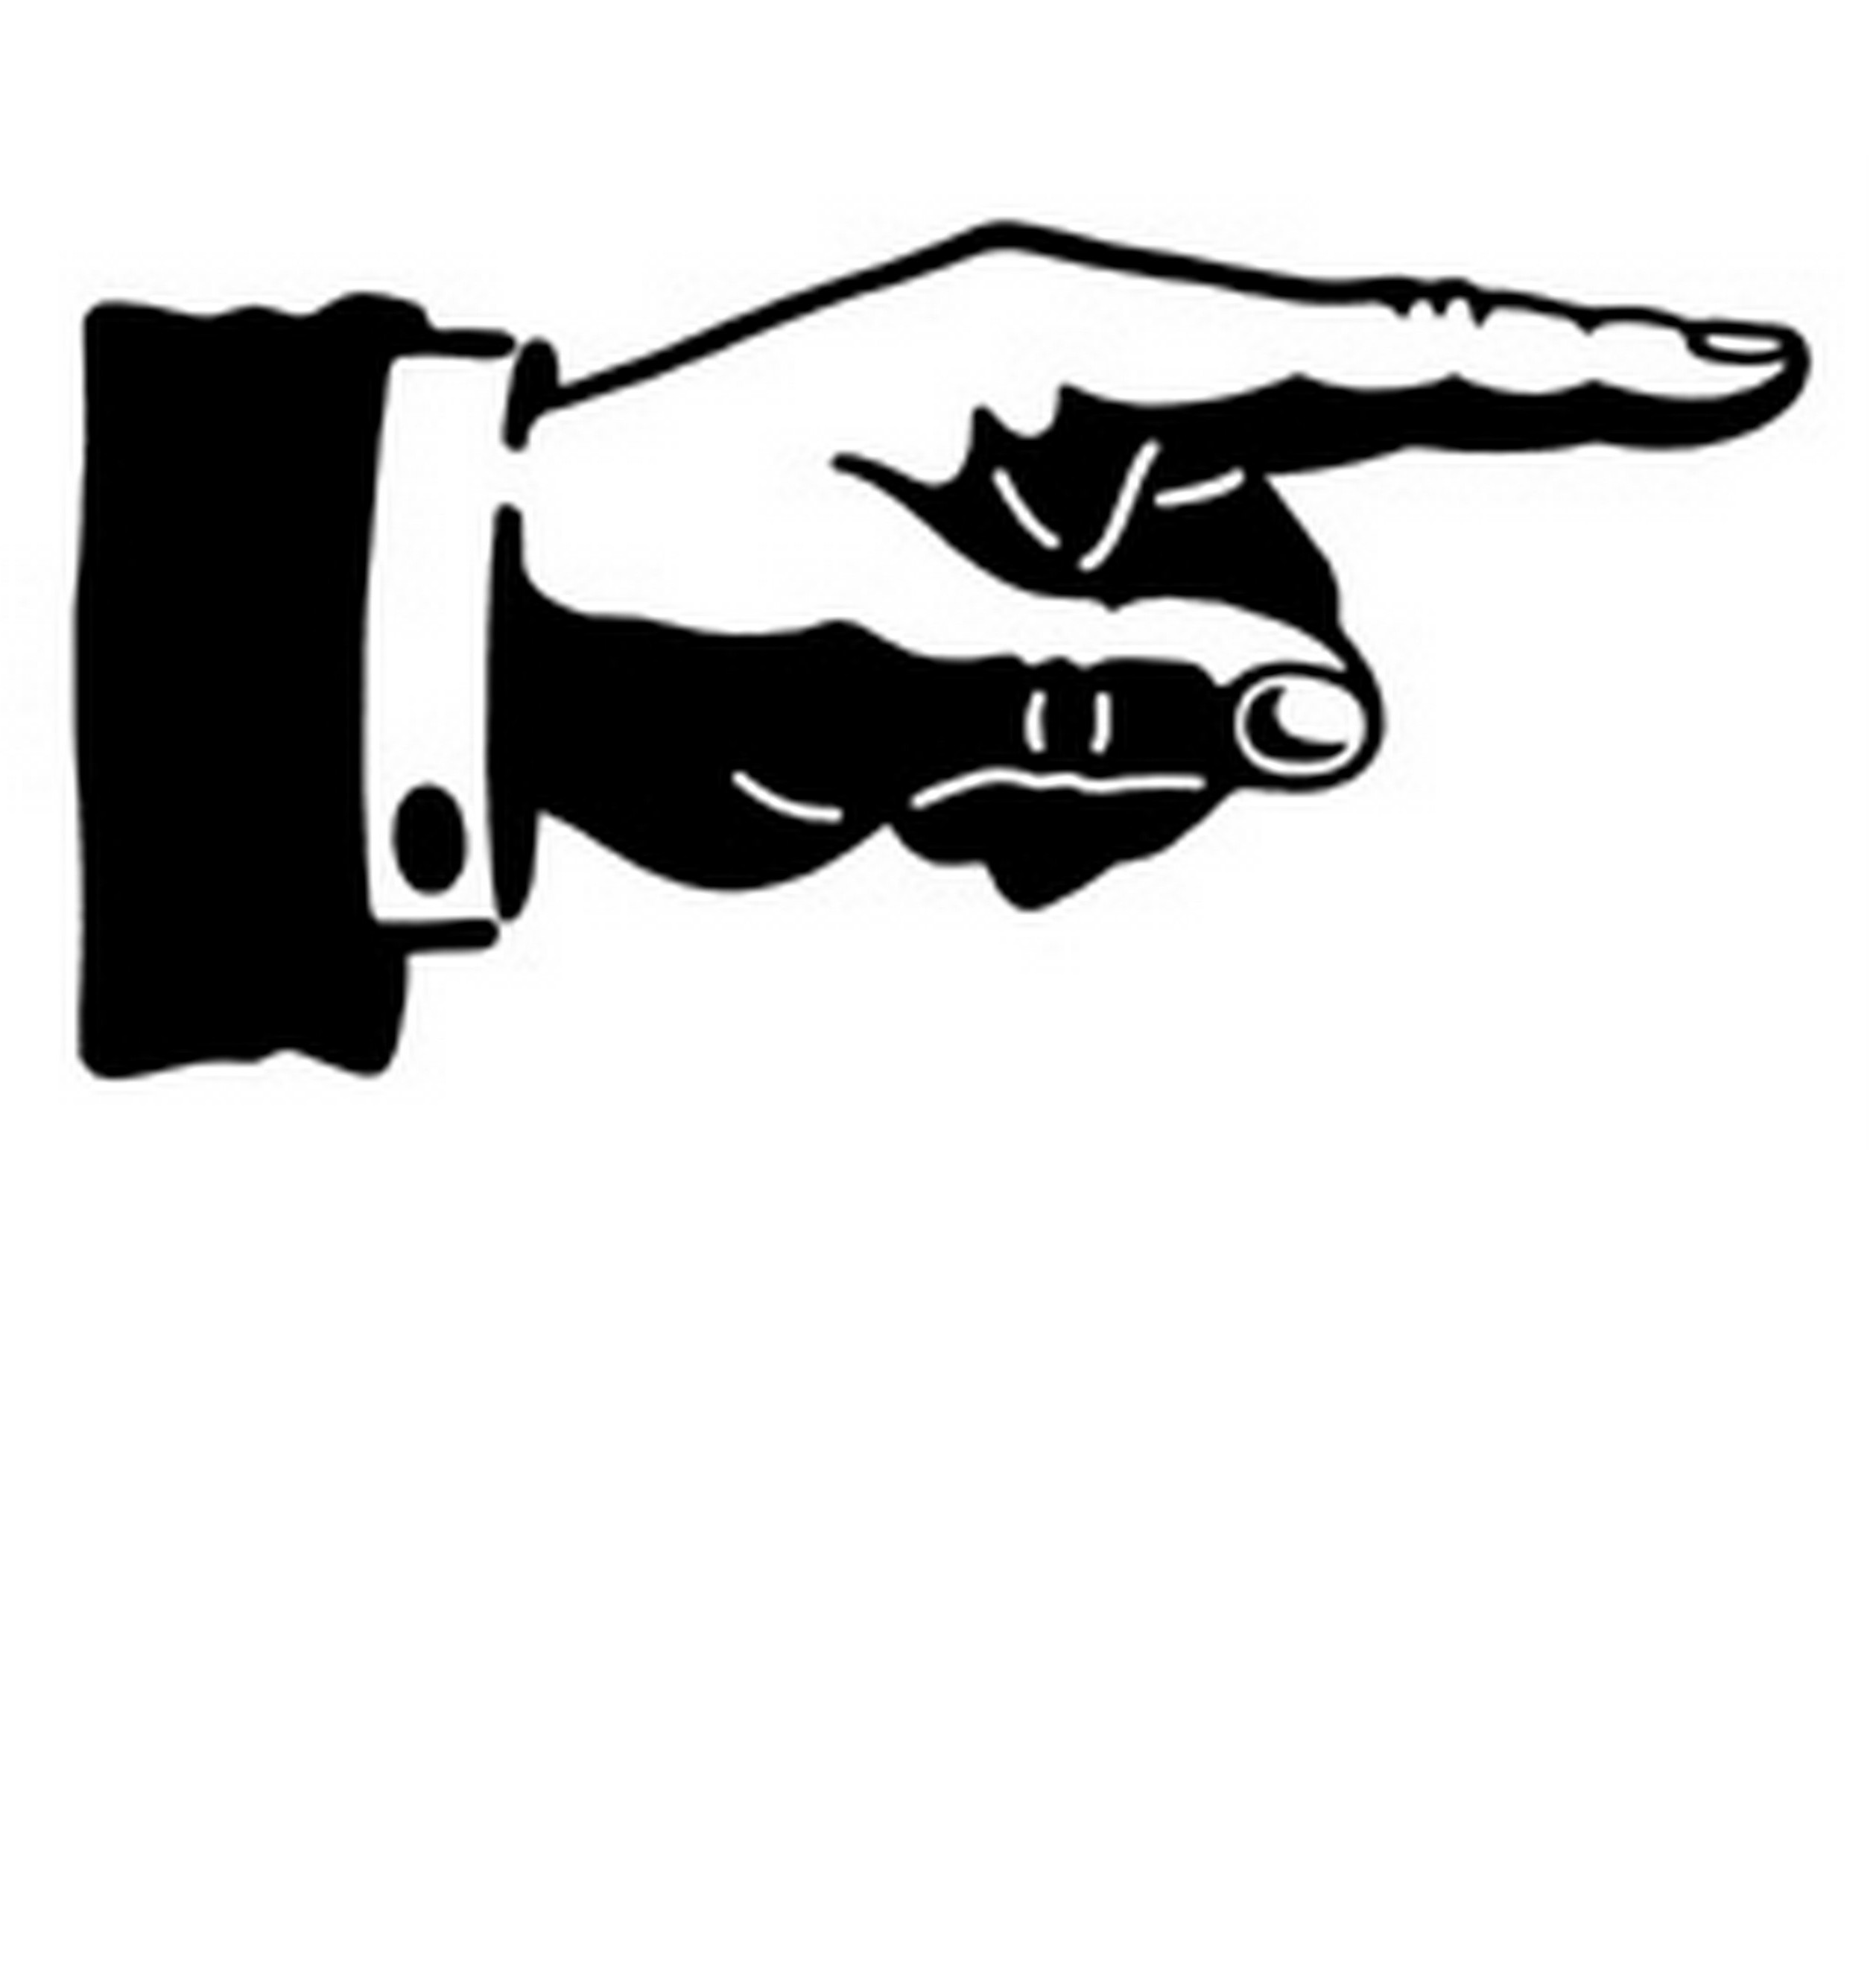 Finger Pointing Clipart Black And White - Finger Pointing At You ...